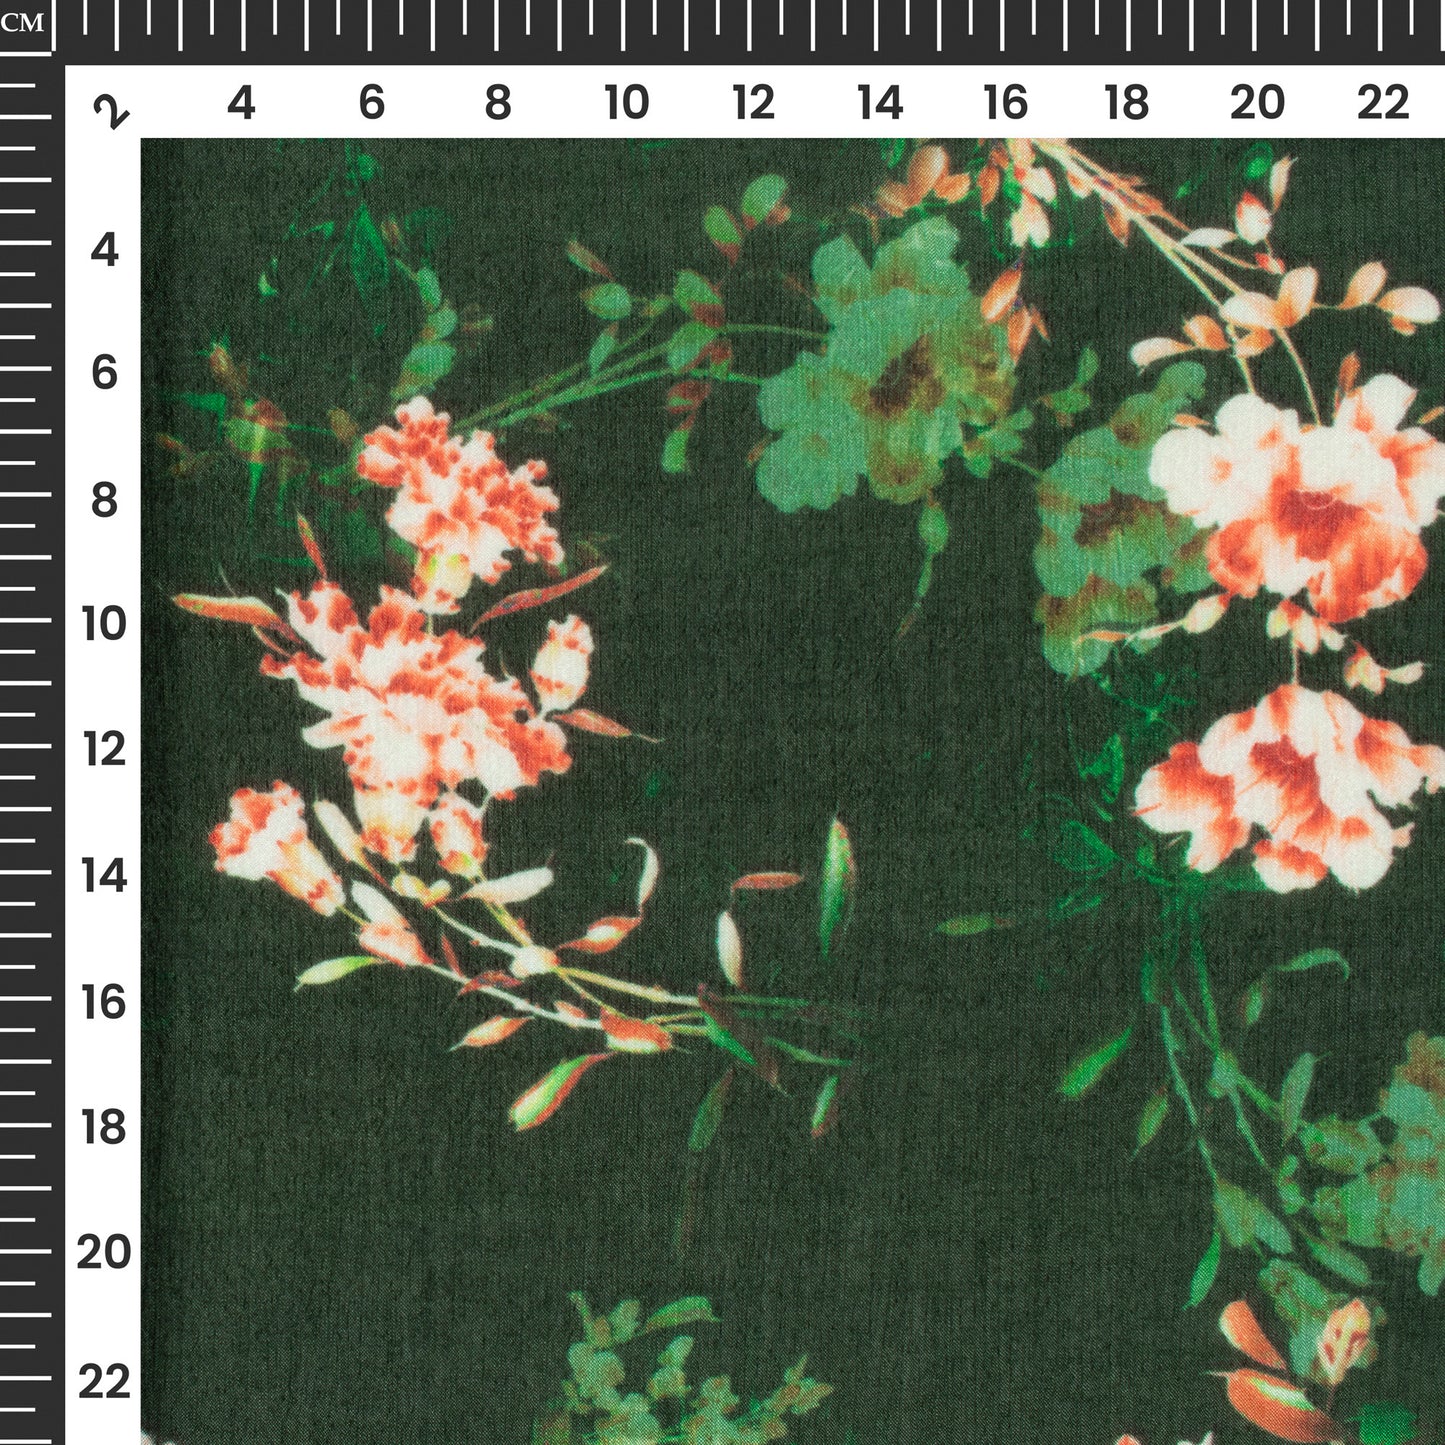 Forever Floral Digital Print Poly Chinnon Chiffon Fabric